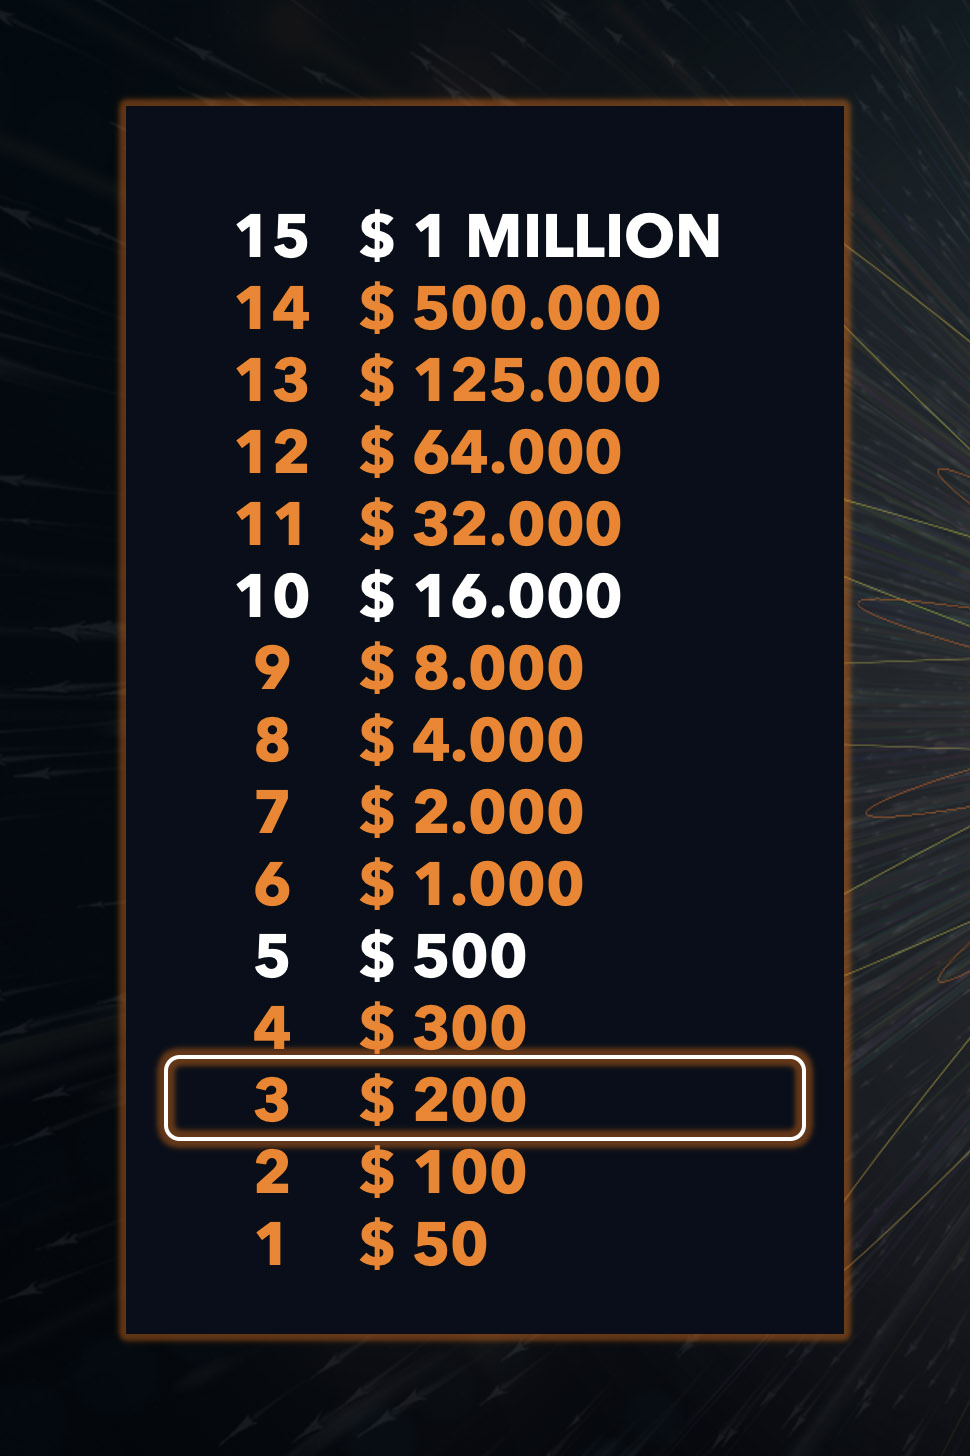 Who Wants to be a Millionaire PowerPoint Template  SlideLizard® Intended For Who Wants To Be A Millionaire Powerpoint Template